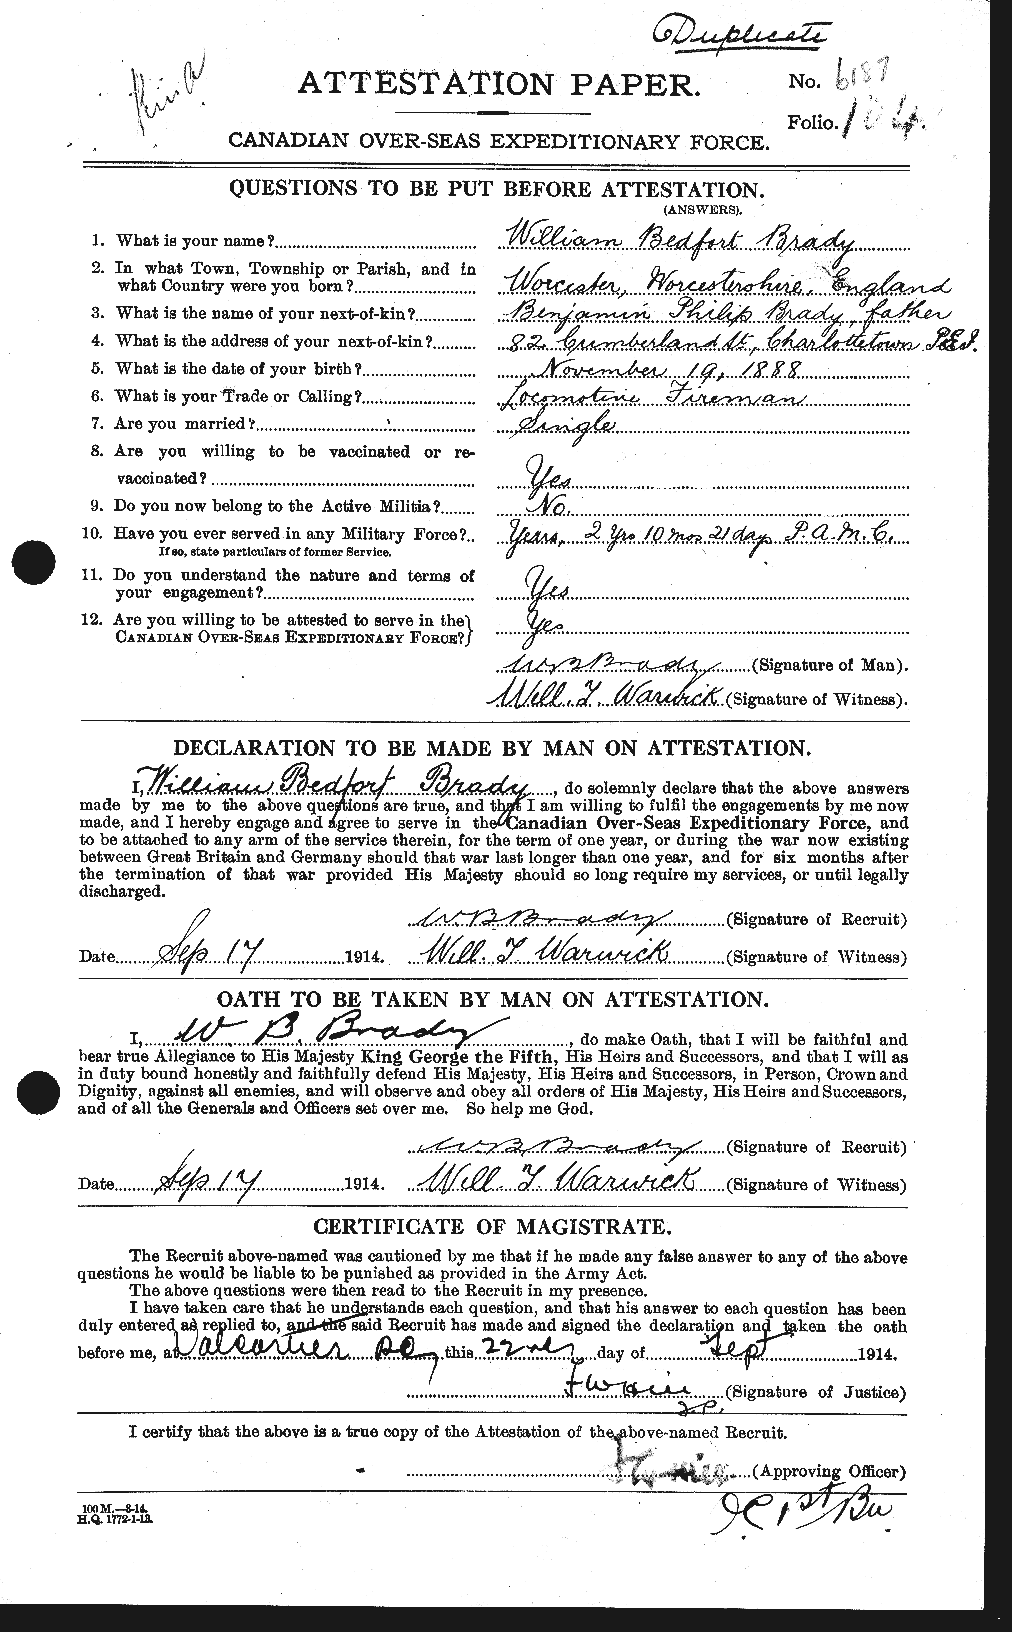 Personnel Records of the First World War - CEF 257268a